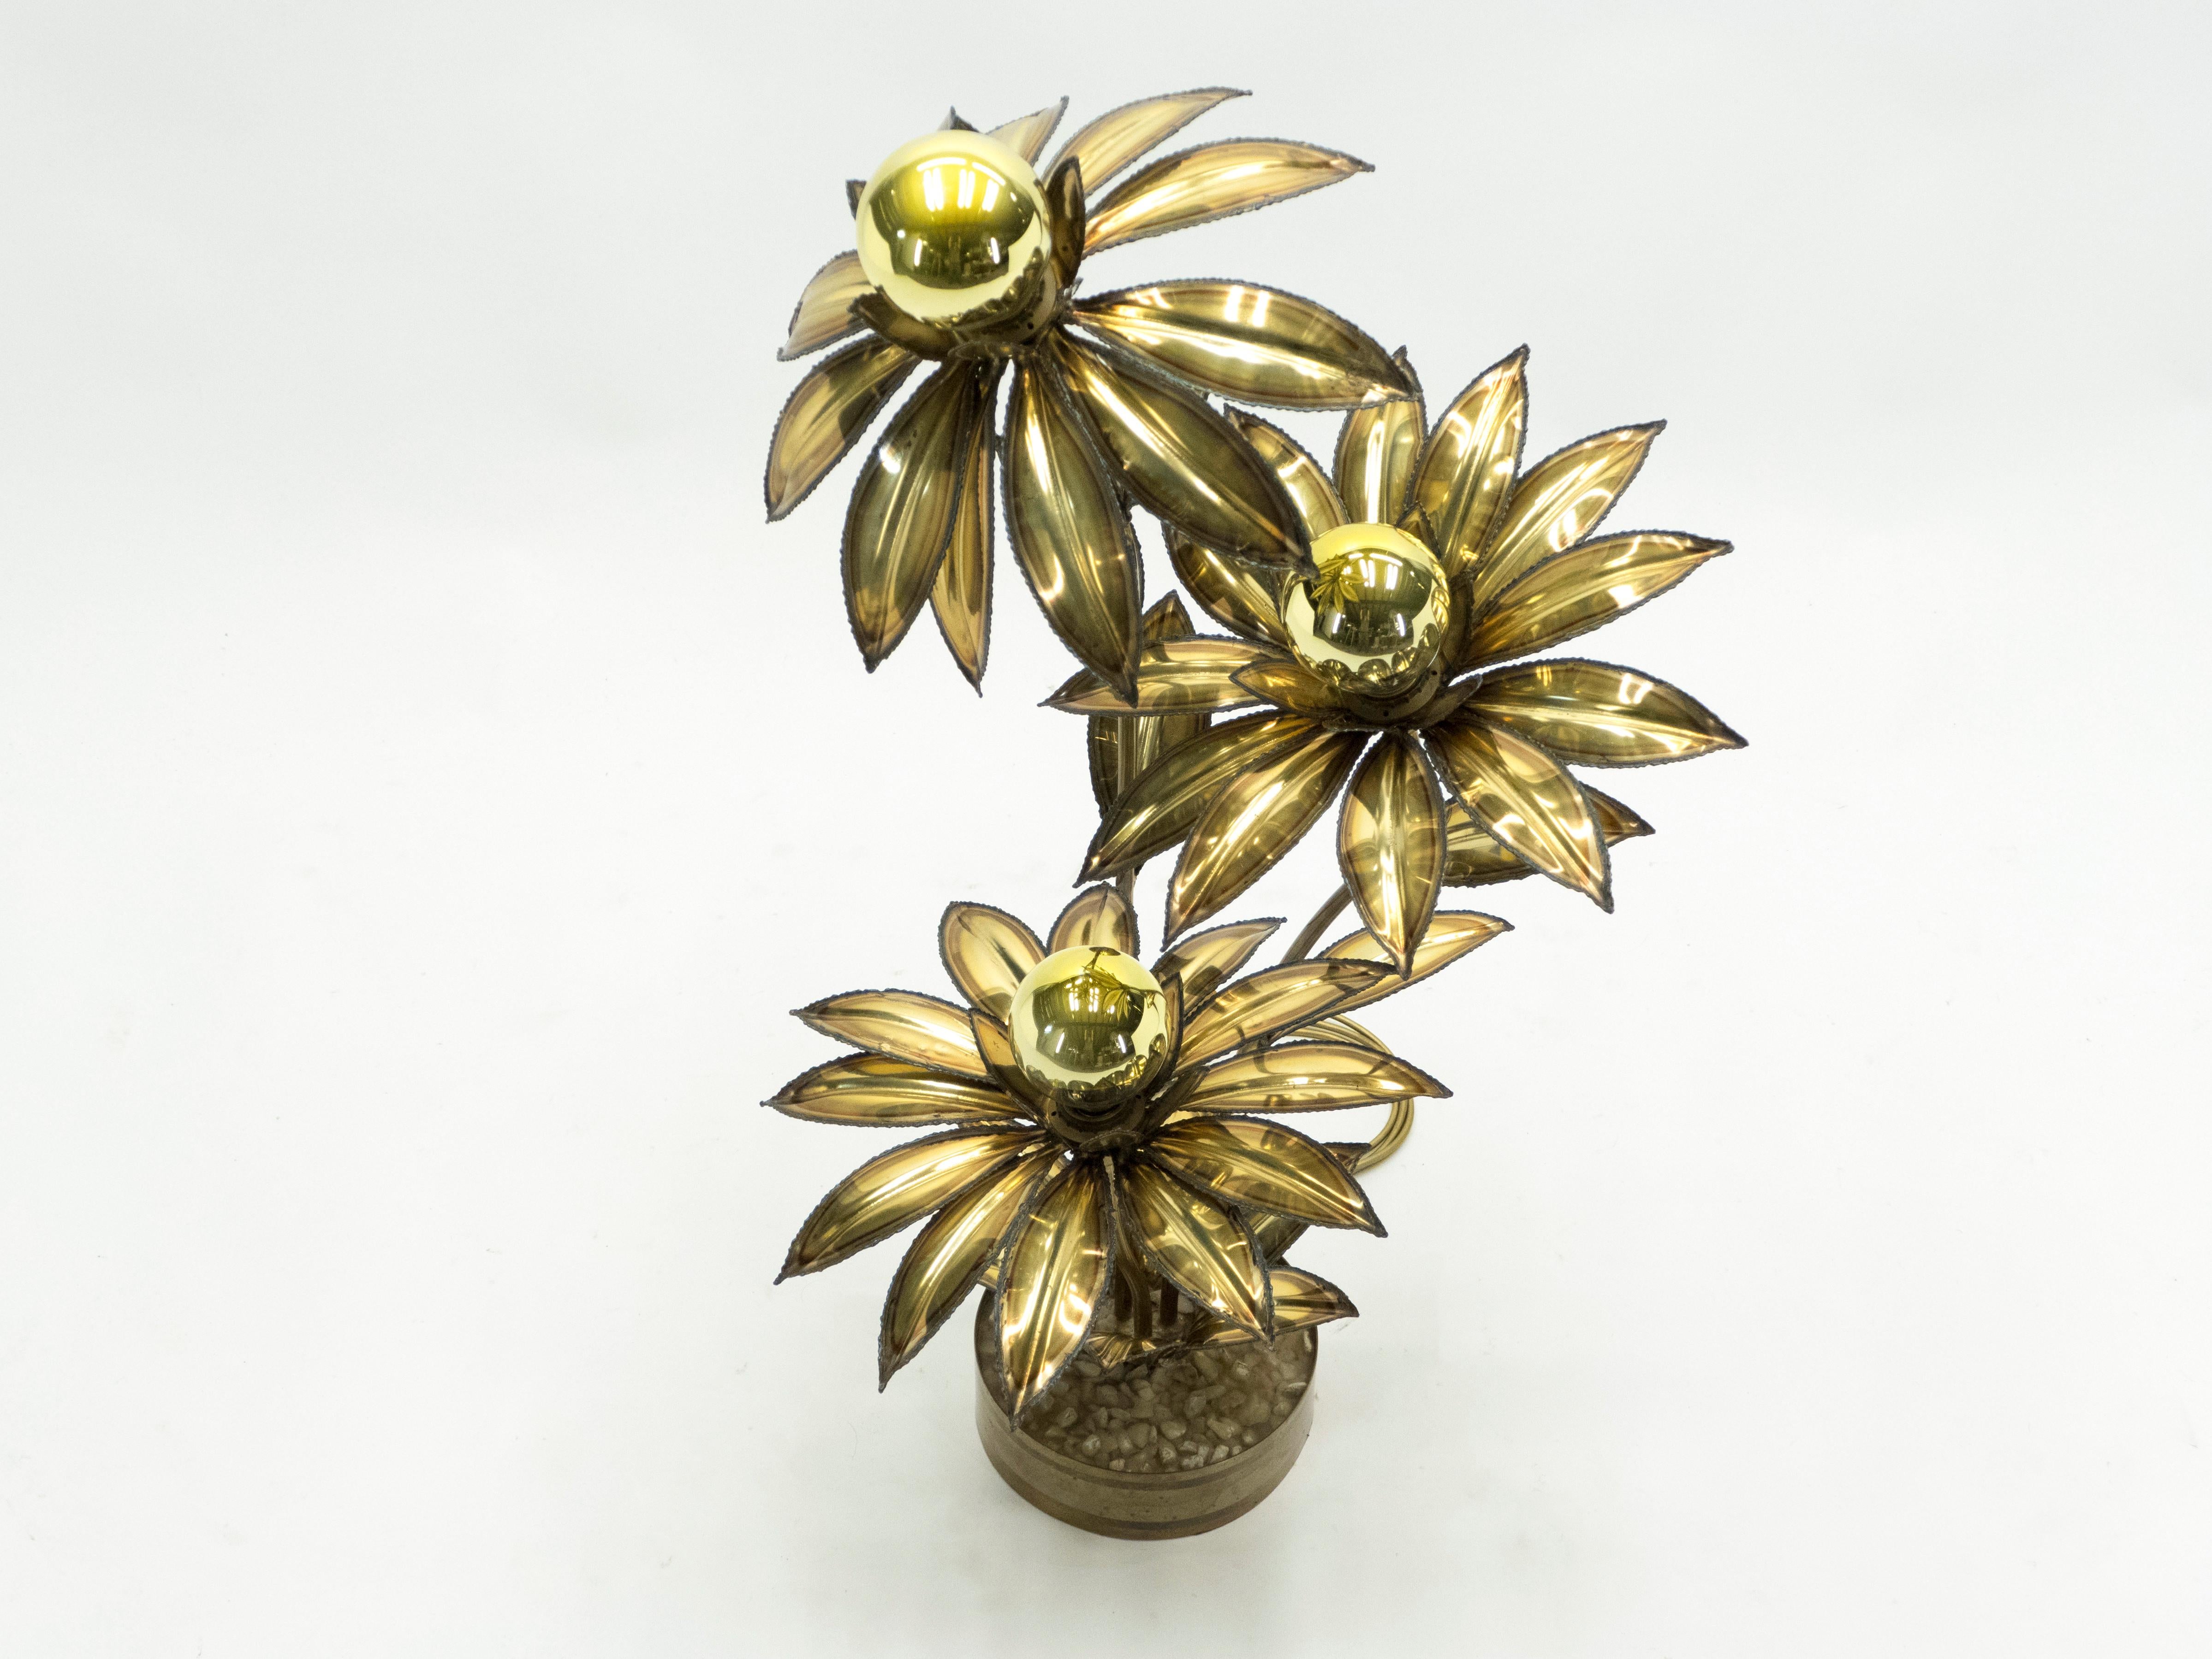 For those that derive their inspiration from nature, this enchanting 1970s floor lamp will revitalize any room design. Primarily made from brass, the lamp features individually rendered flower petals which open up to soft light bulbs, delicately